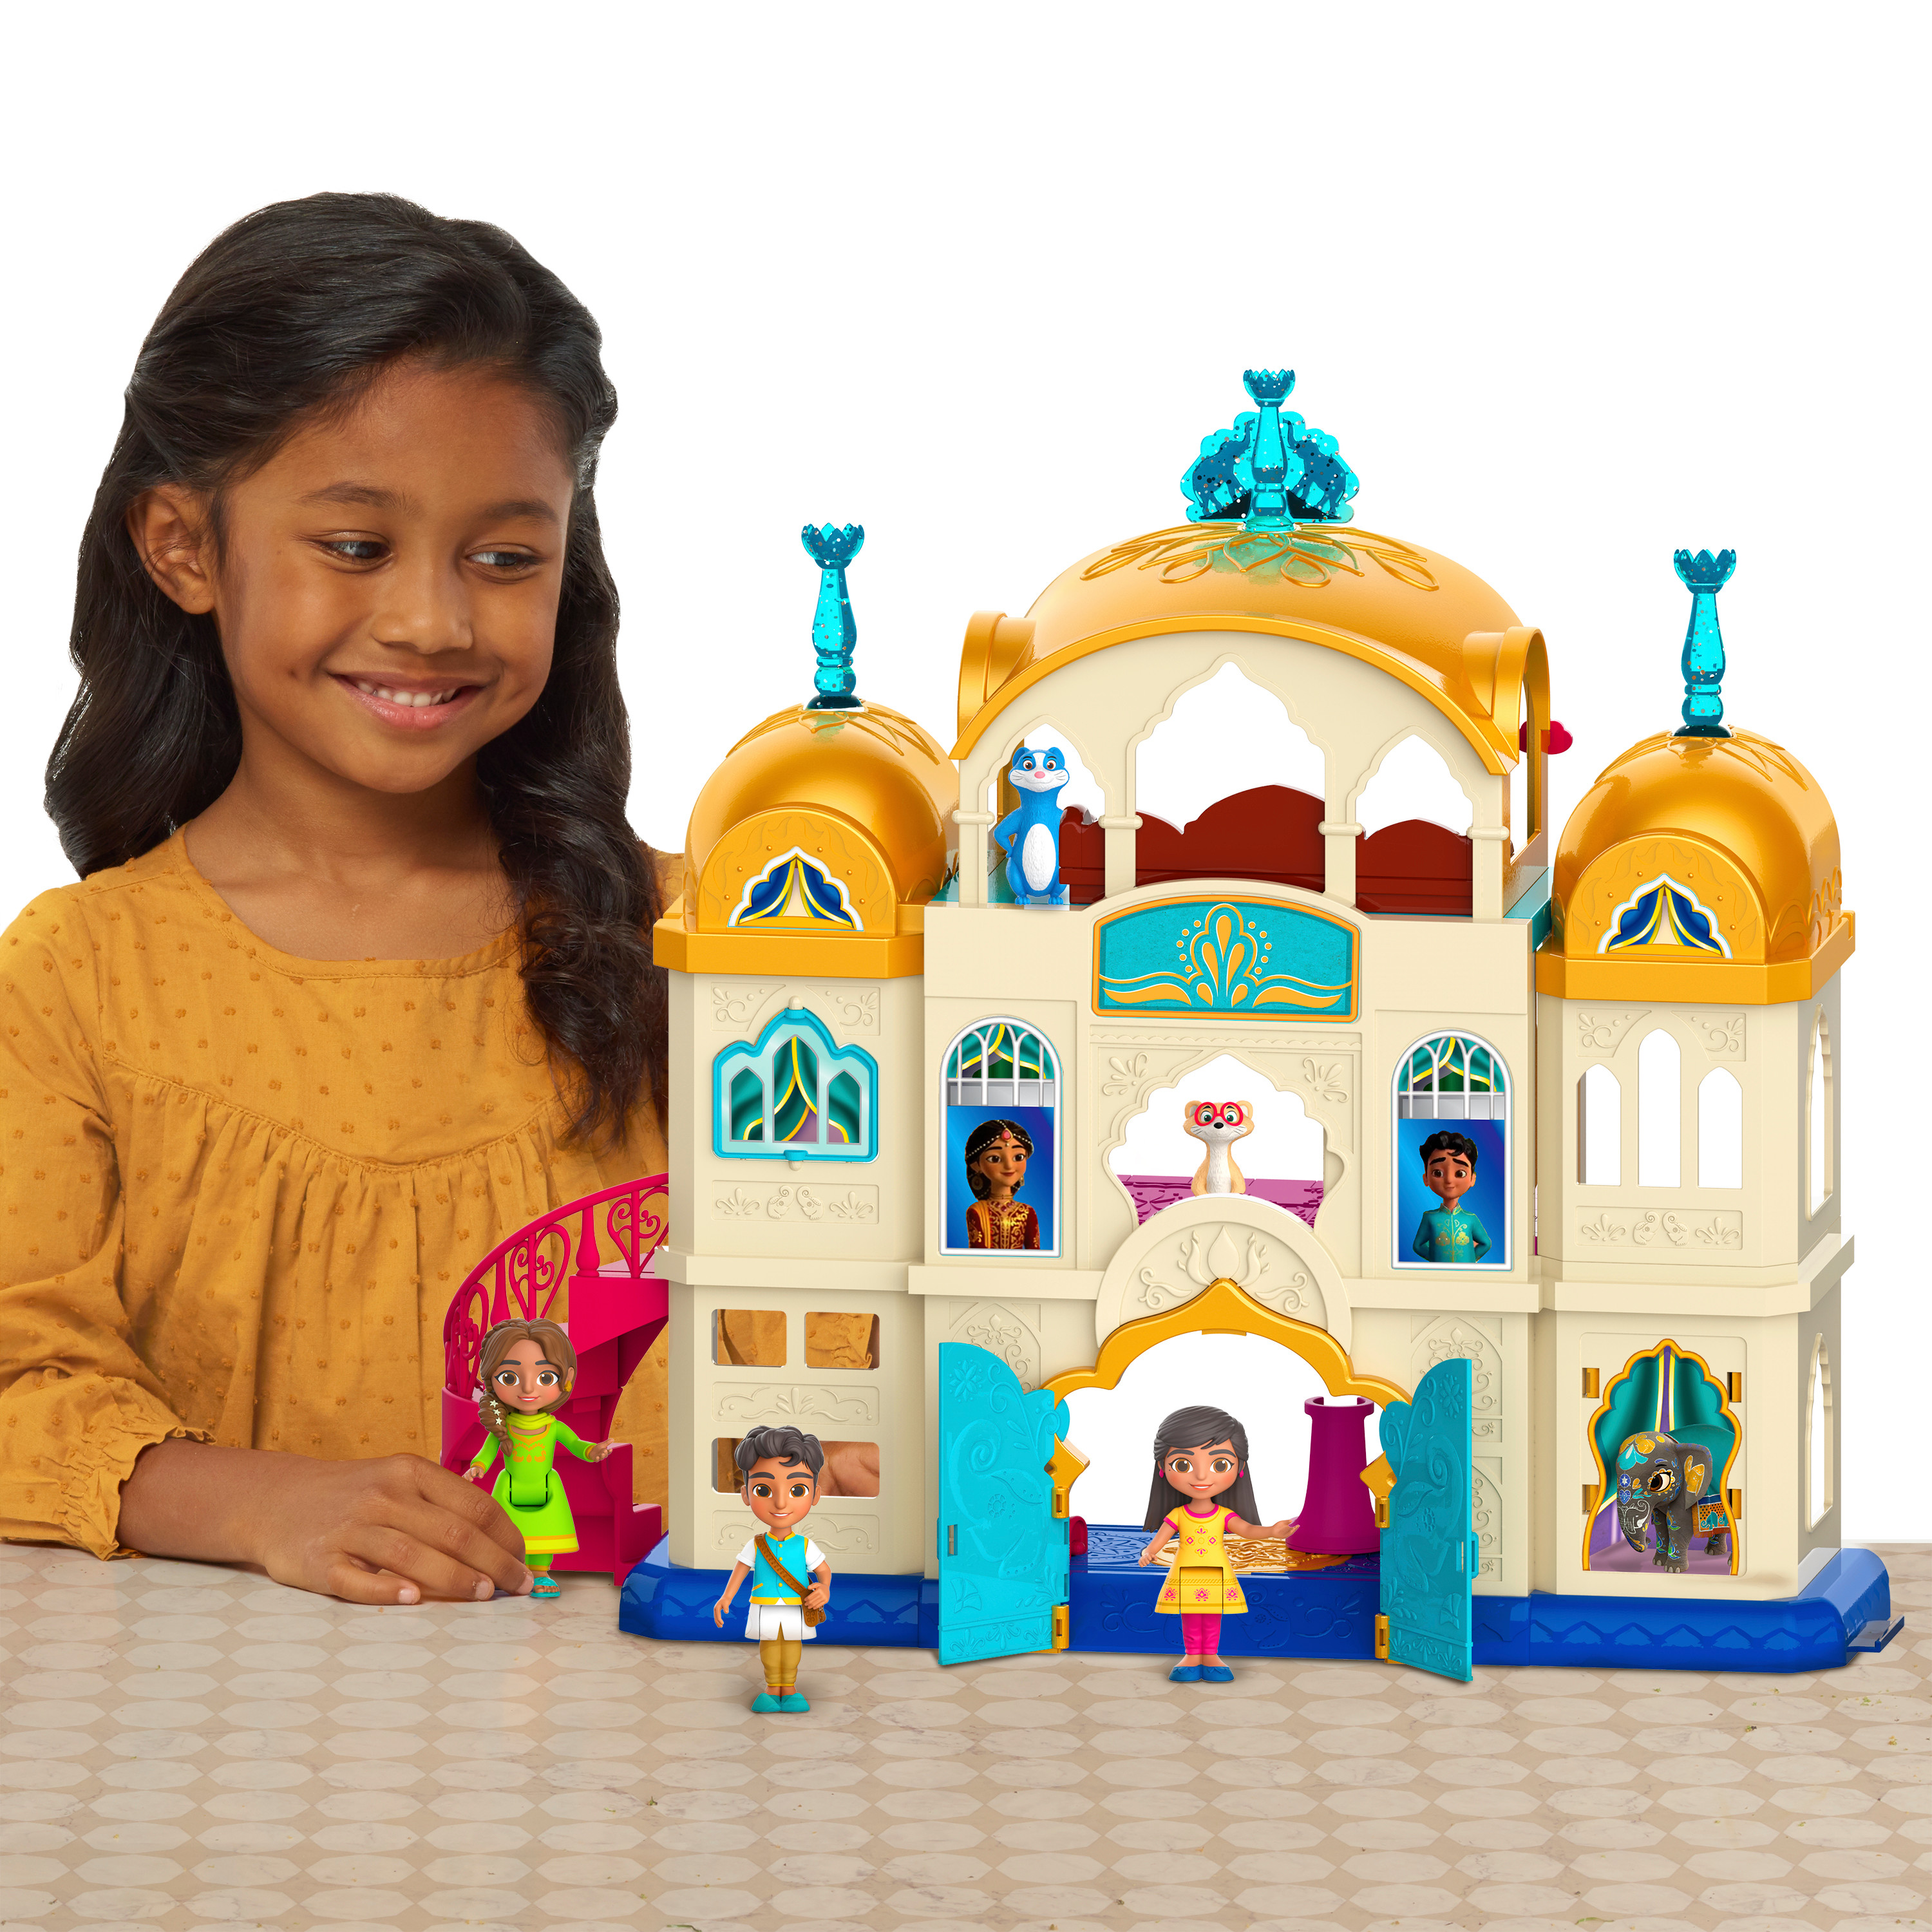 Disney Junior Royal Adventures Palace Playset, Officially Licensed Kids Toys for Ages 3 Up, Gifts and Presents - image 3 of 8